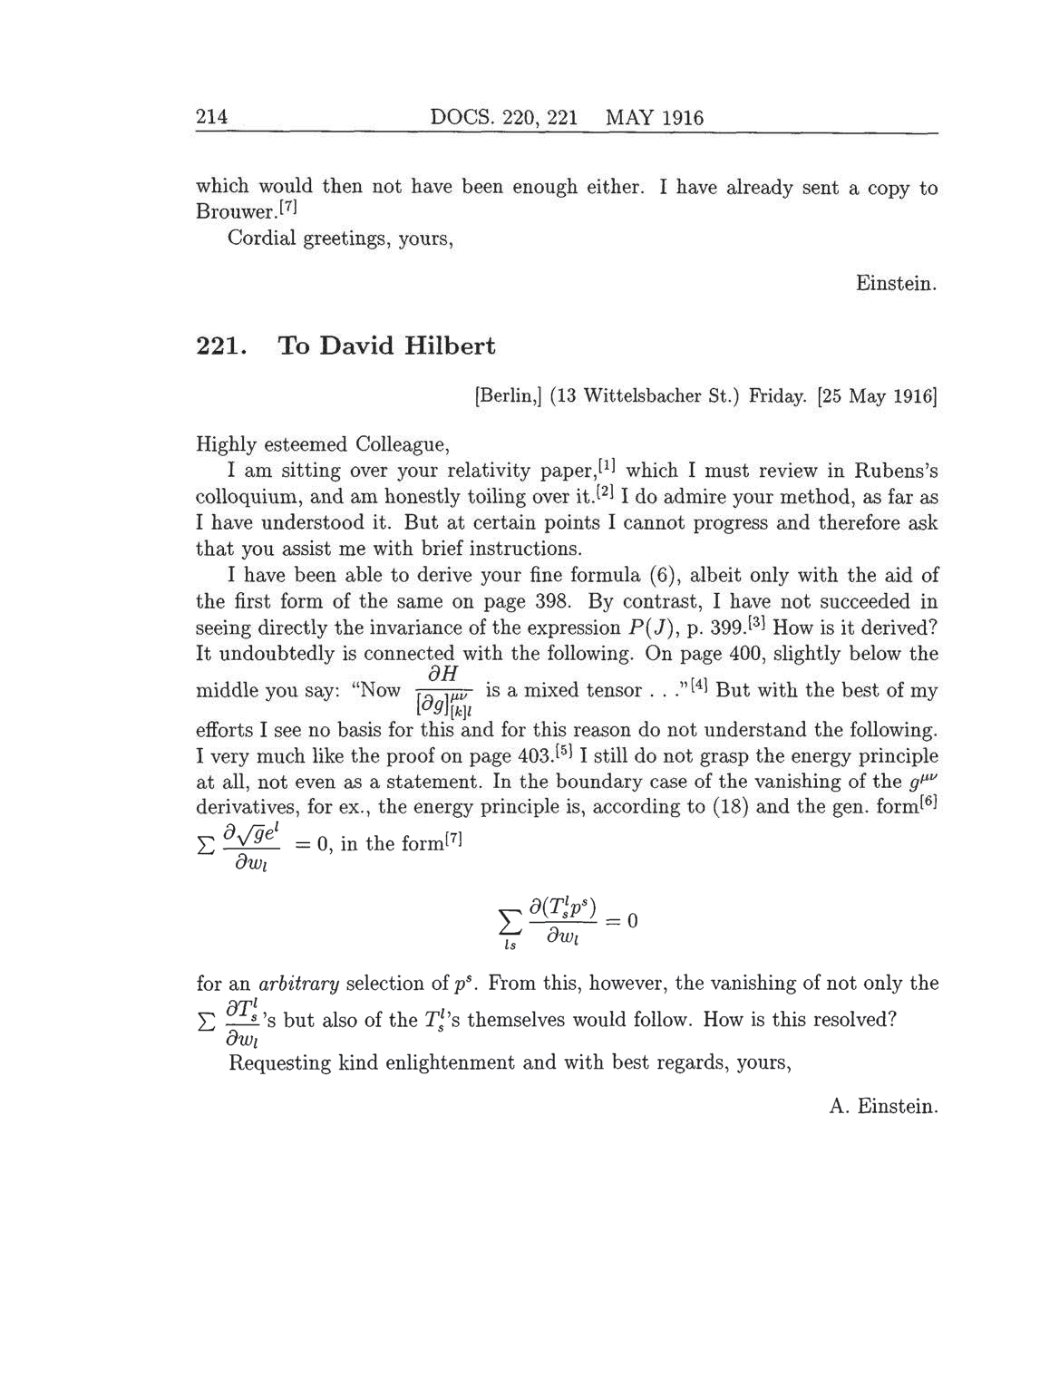 Volume 8: The Berlin Years: Correspondence, 1914-1918 (English translation supplement) page 214